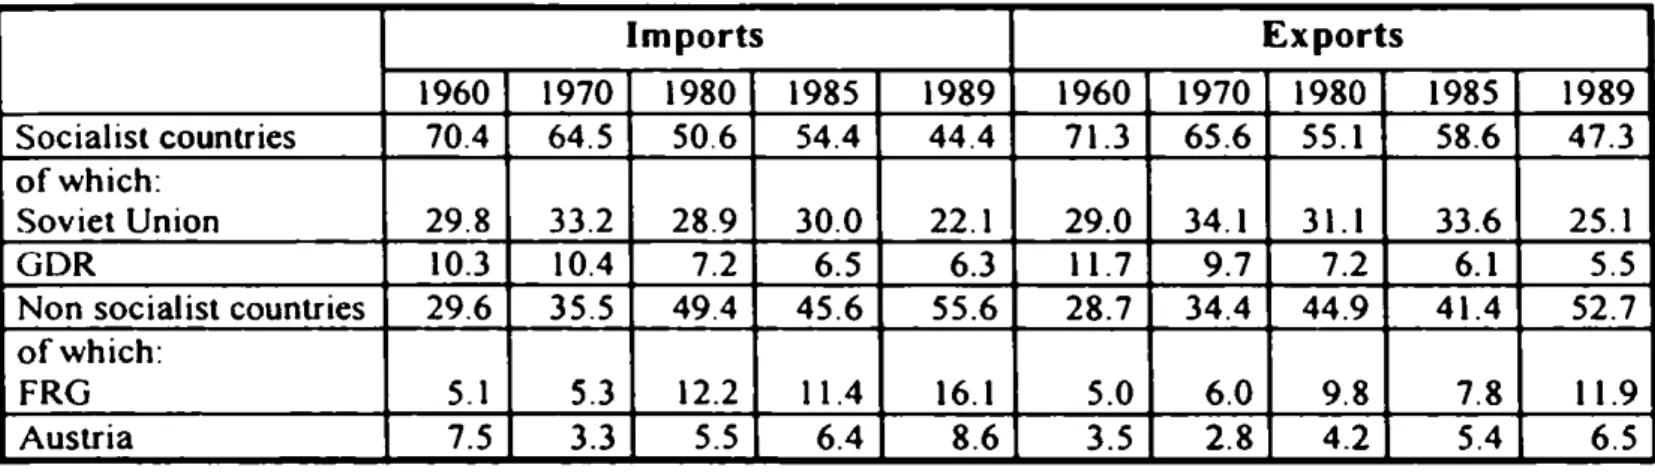 Table  I:  Structure of Hungarian  External Trade by Groups of Countries,  1960-1989 (Total =  100) Imports Exports 1960 1970 1980 1985 1989 1960 1970 1980 1985 1989 Socialist countries 70.4 64.5 50.6 54.4 44.4 71.3 65.6 55.1 58.6 47.3 o f which:  Soviet U